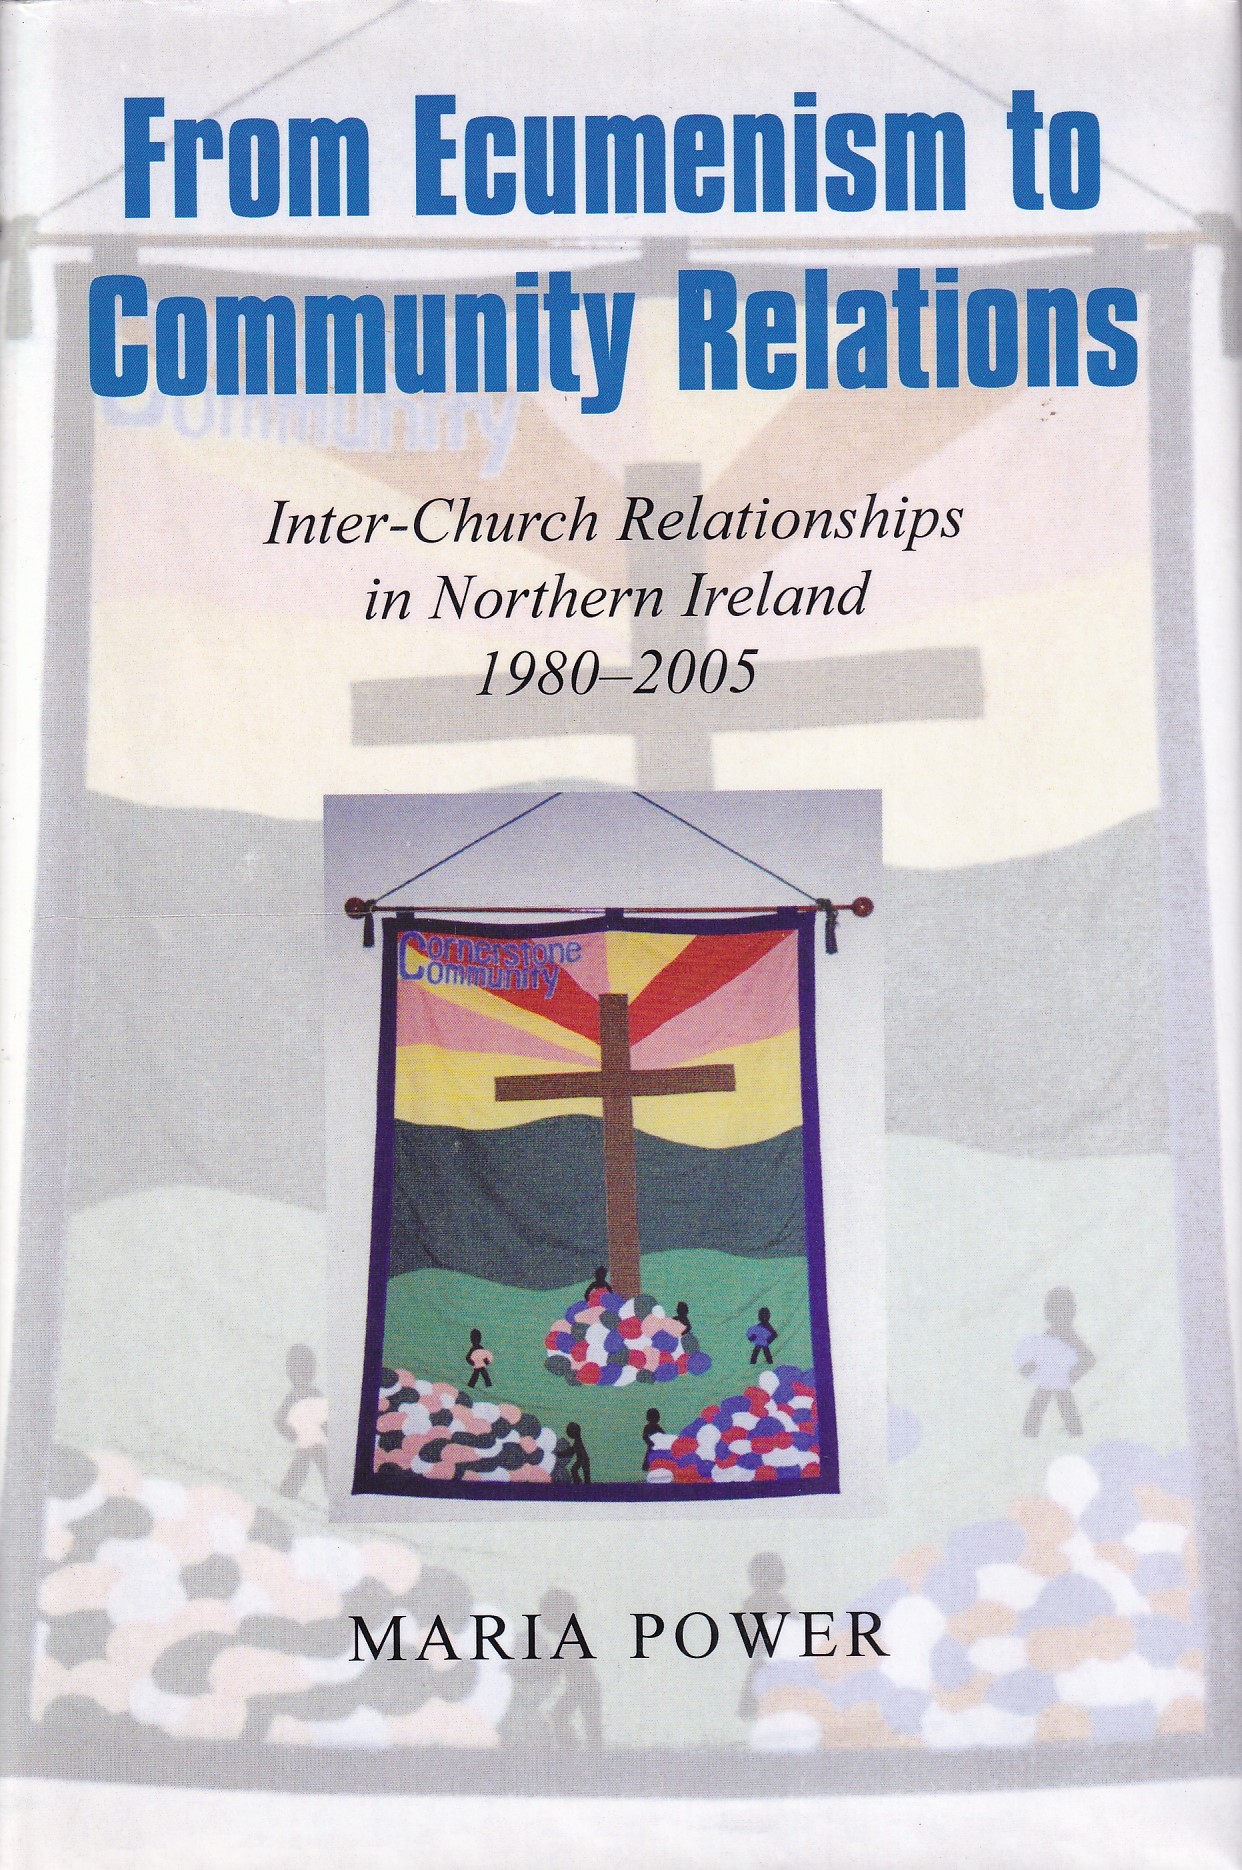 From Ecumenism to Community Relations: Inter-Church Relationships in Northern Ireland 1980-2005 | Maria Power | Charlie Byrne's